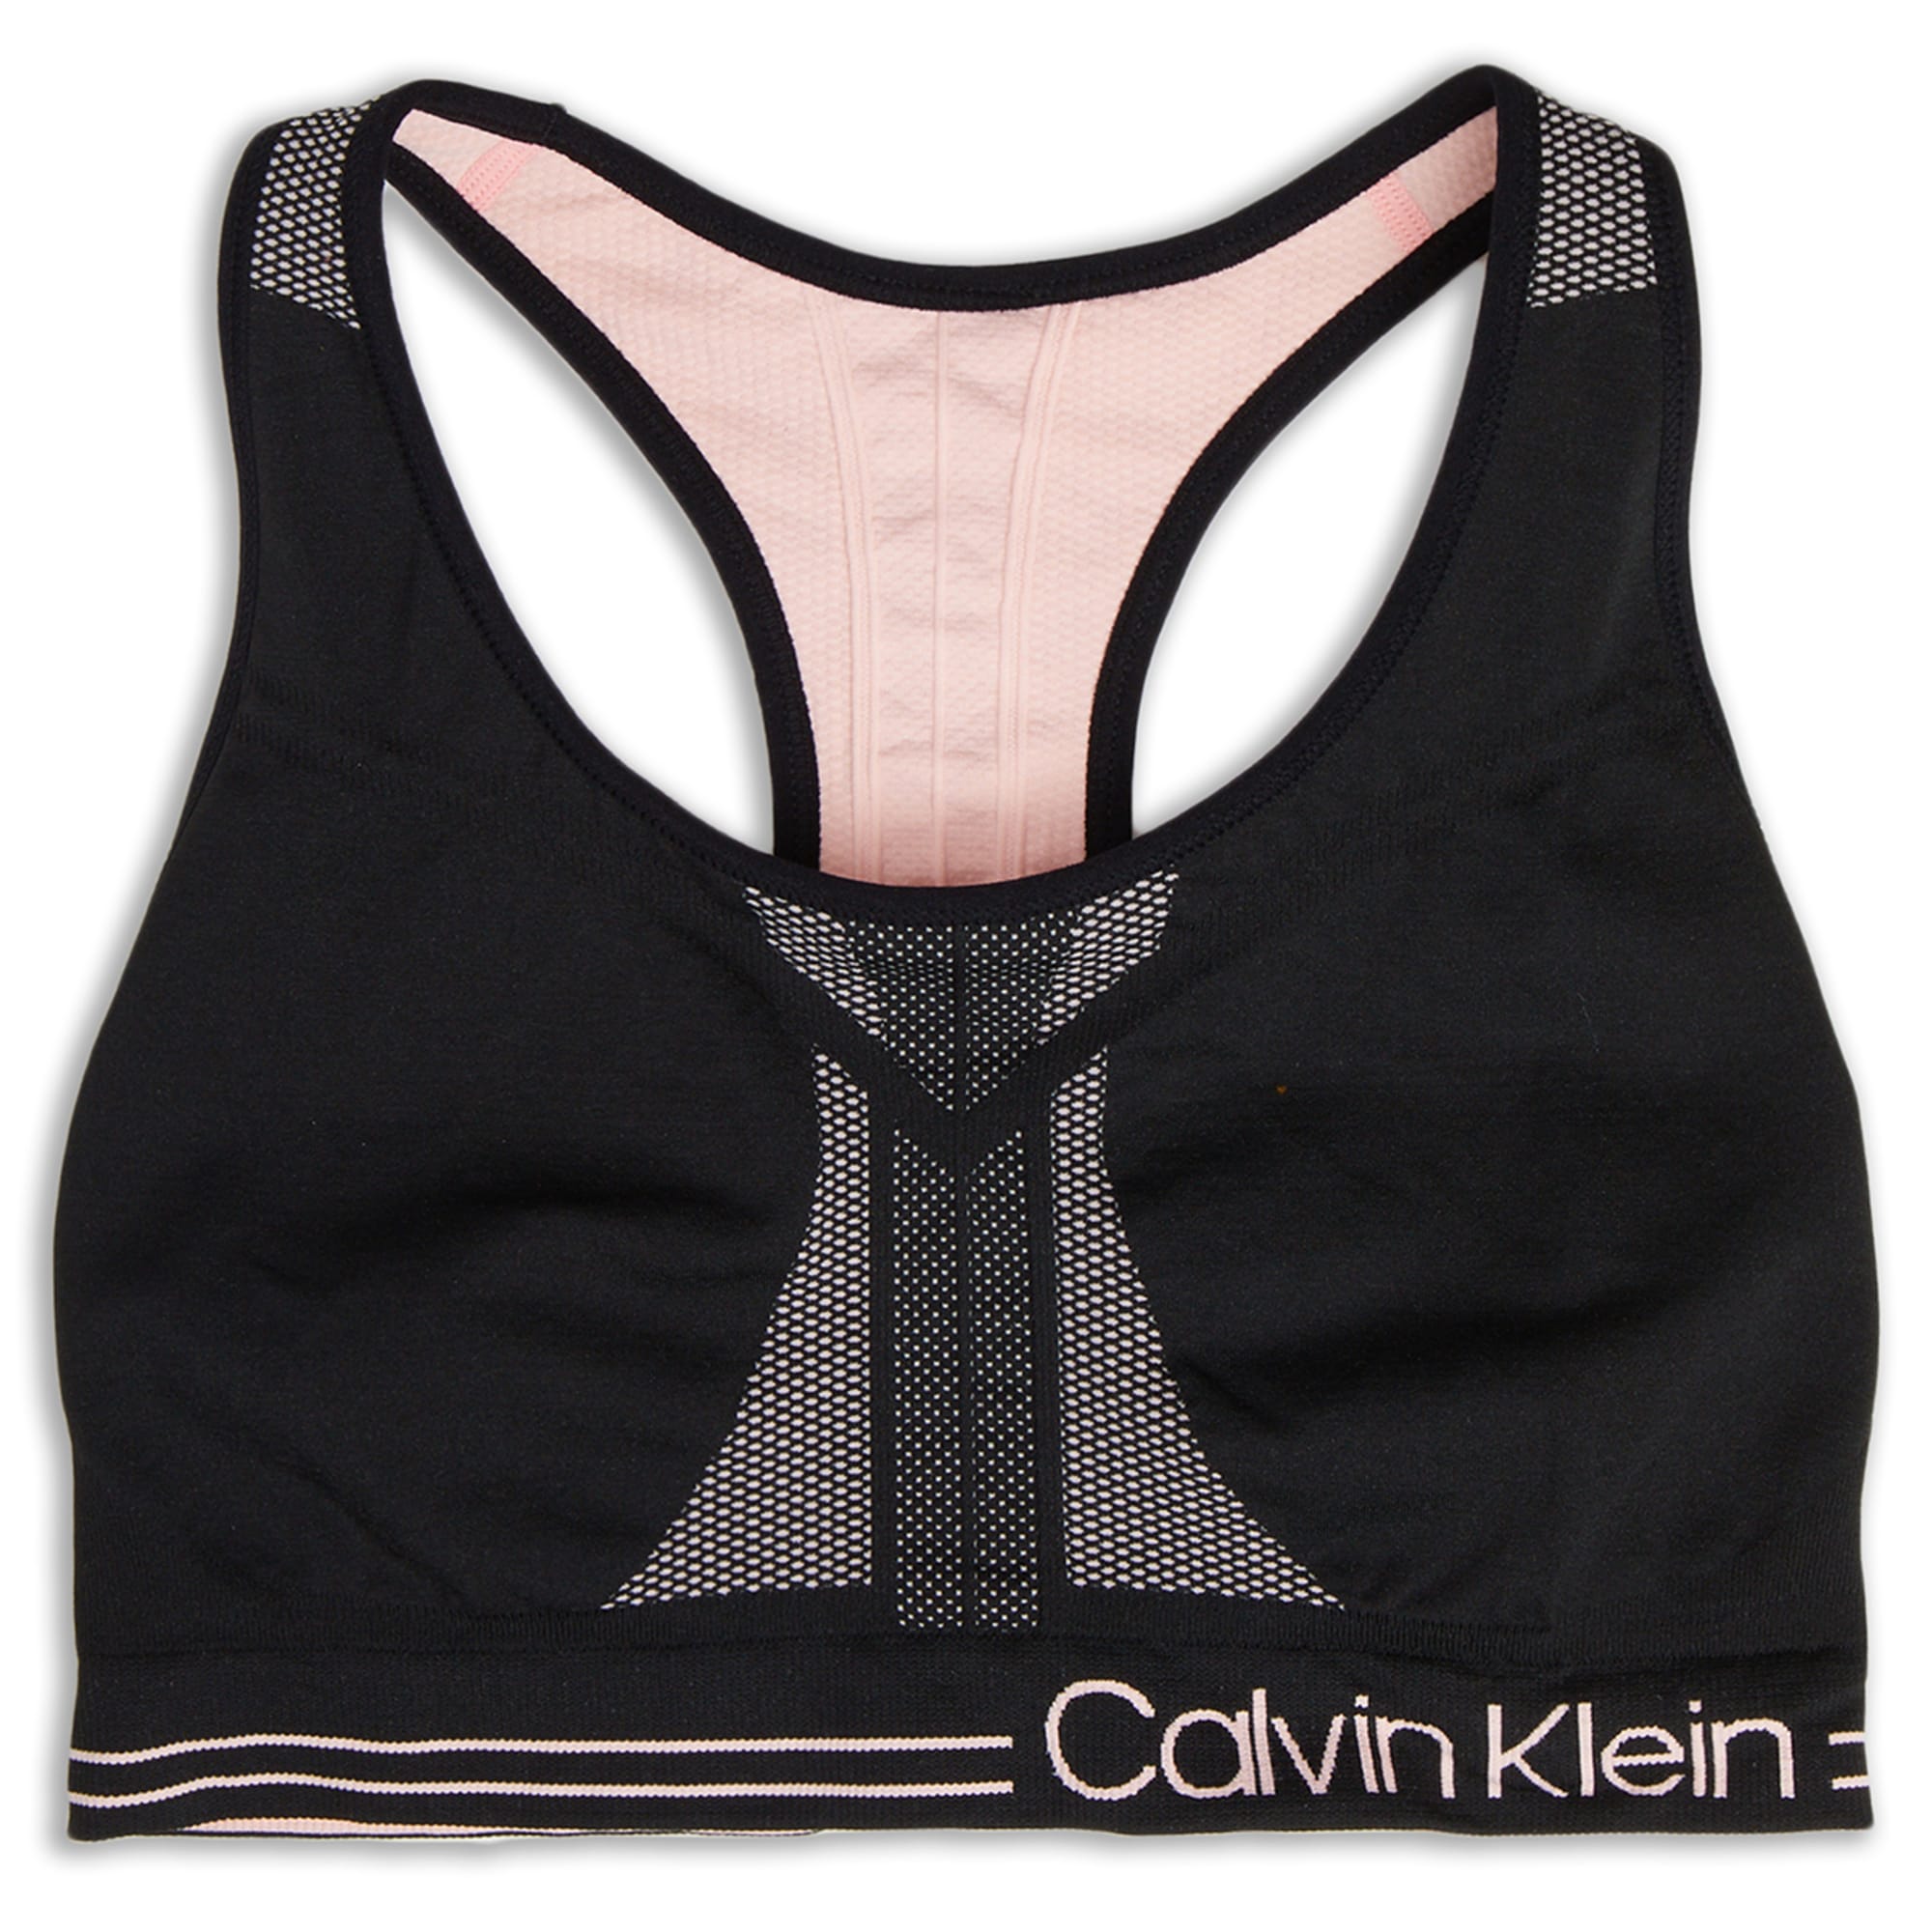 Calvin Klein Performance Color Block Pink Sports Bra Size S - 55% off